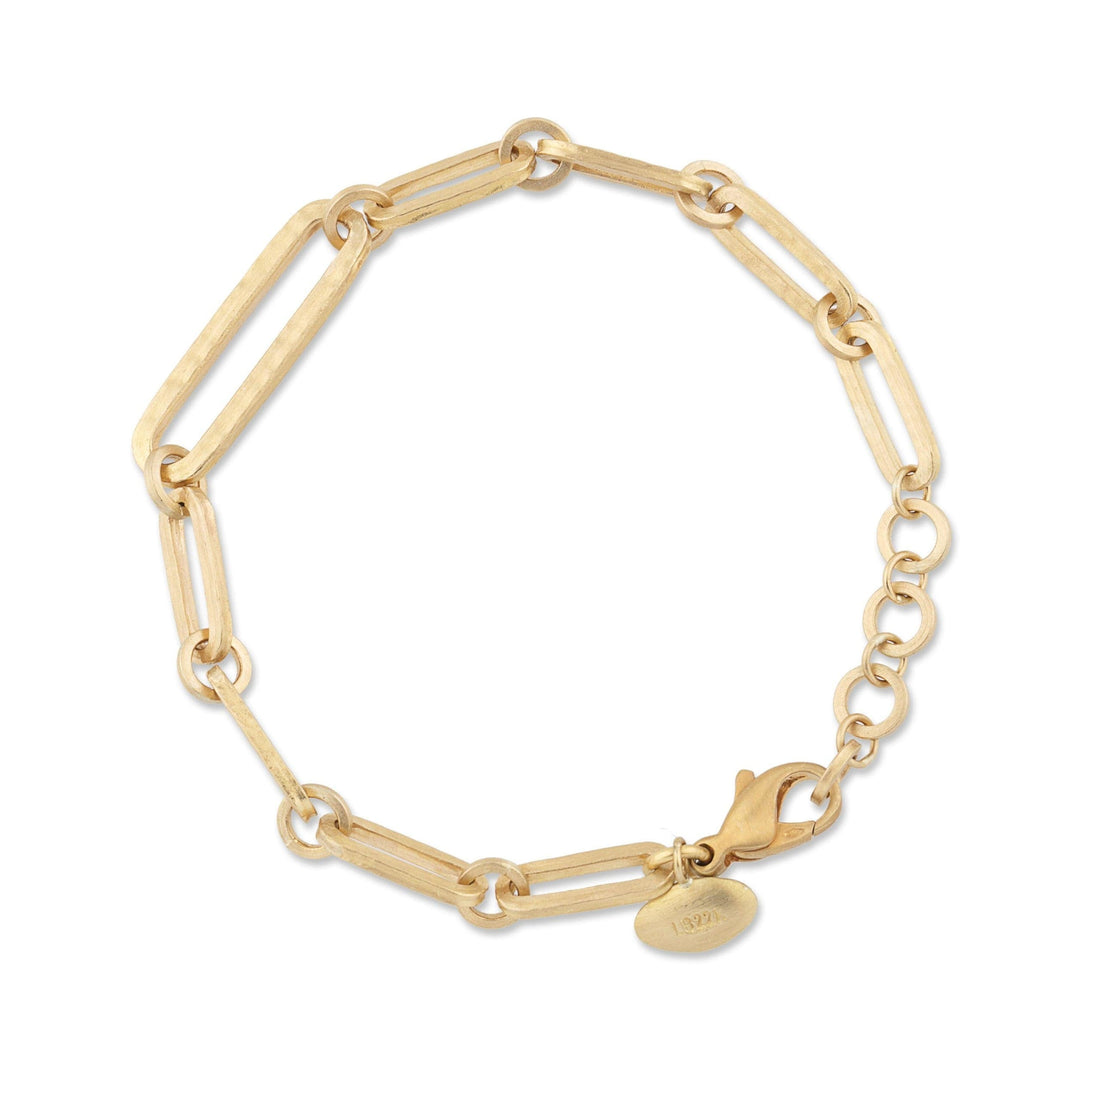 Yellow Gold Chill-Link Chain Bracelet by Lika Behar - Skeie's Jewelers